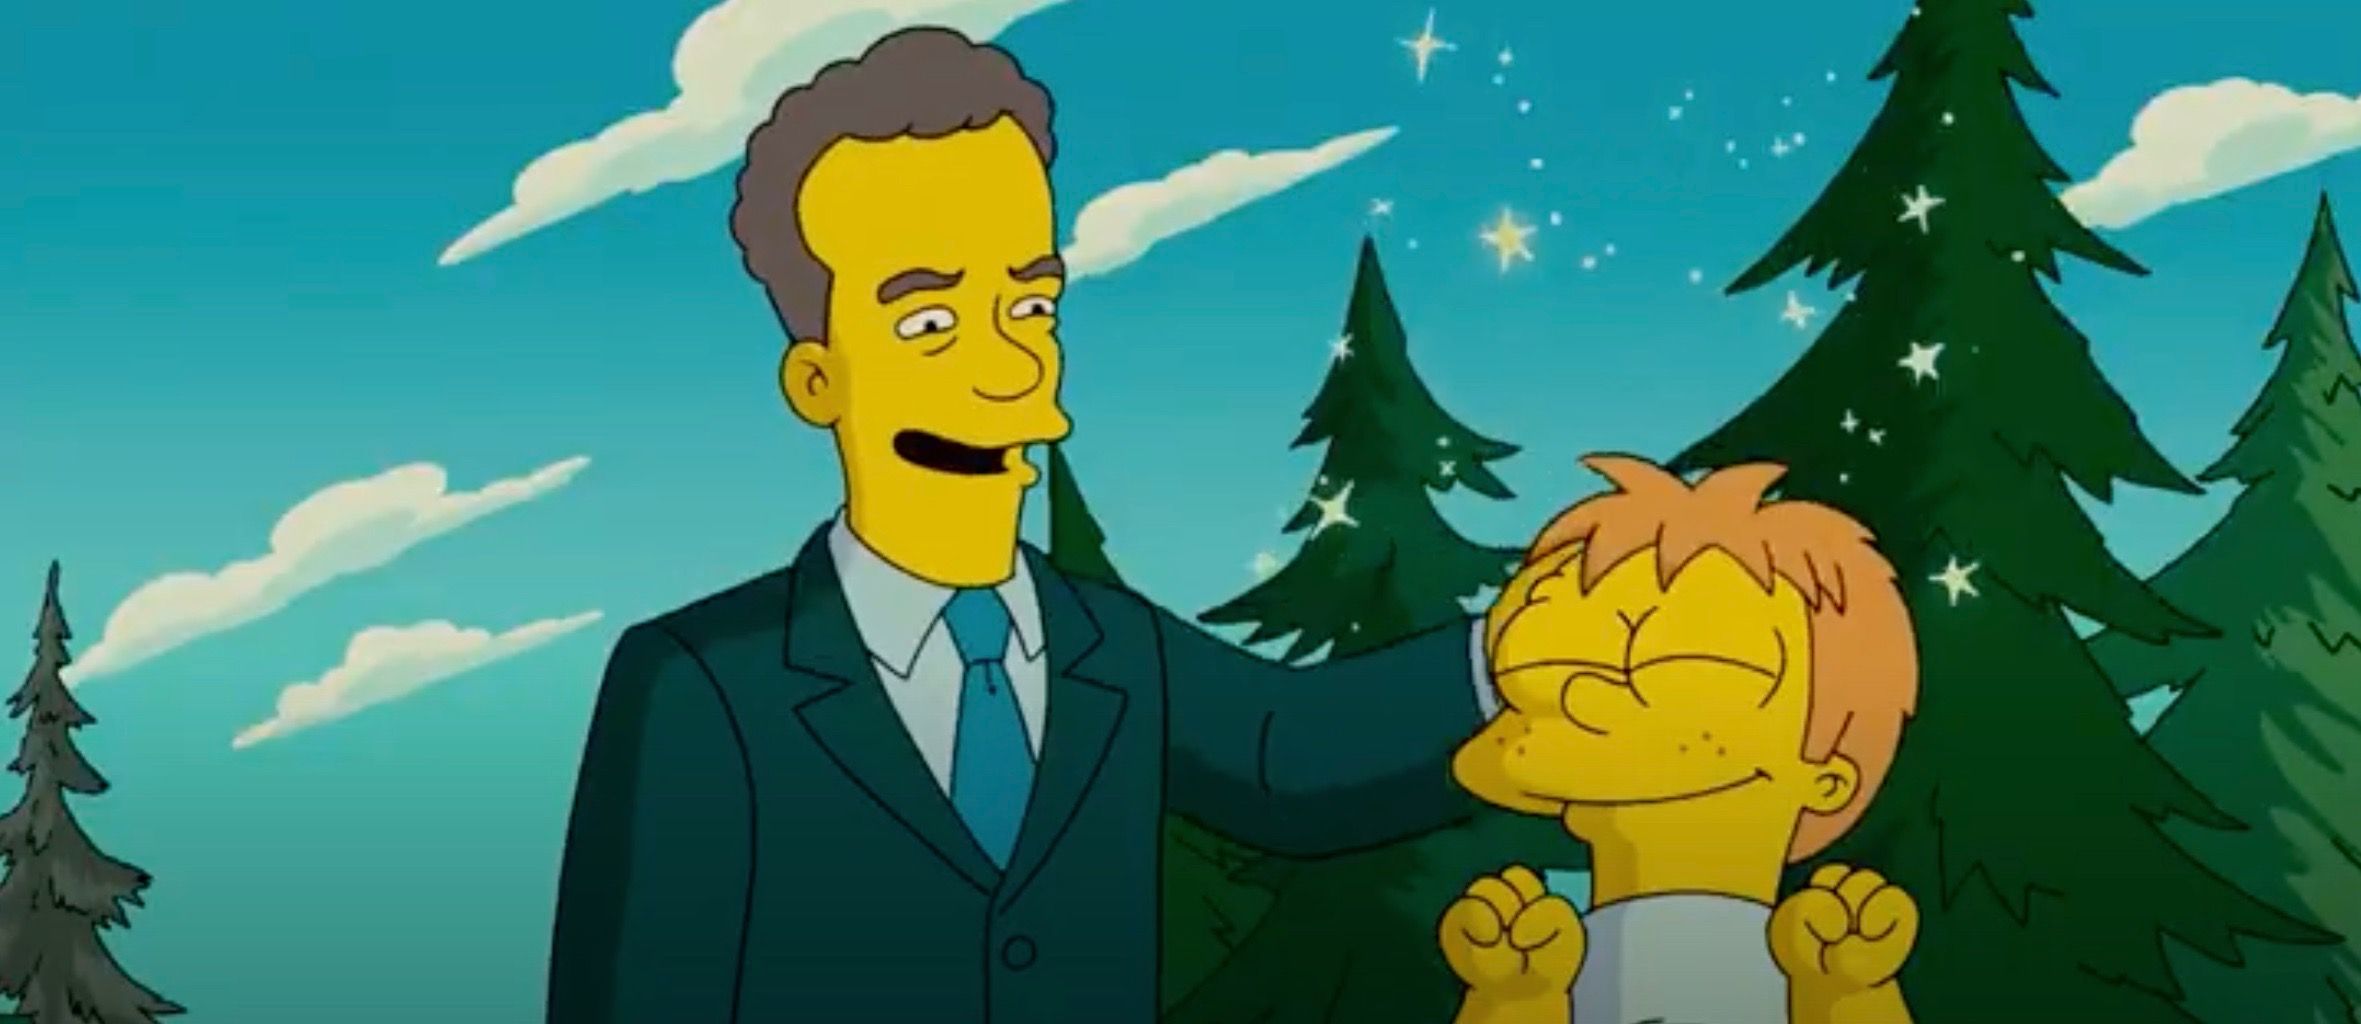 Tom Hanks rubbing a little boy's hair in The Simpsons Movie.